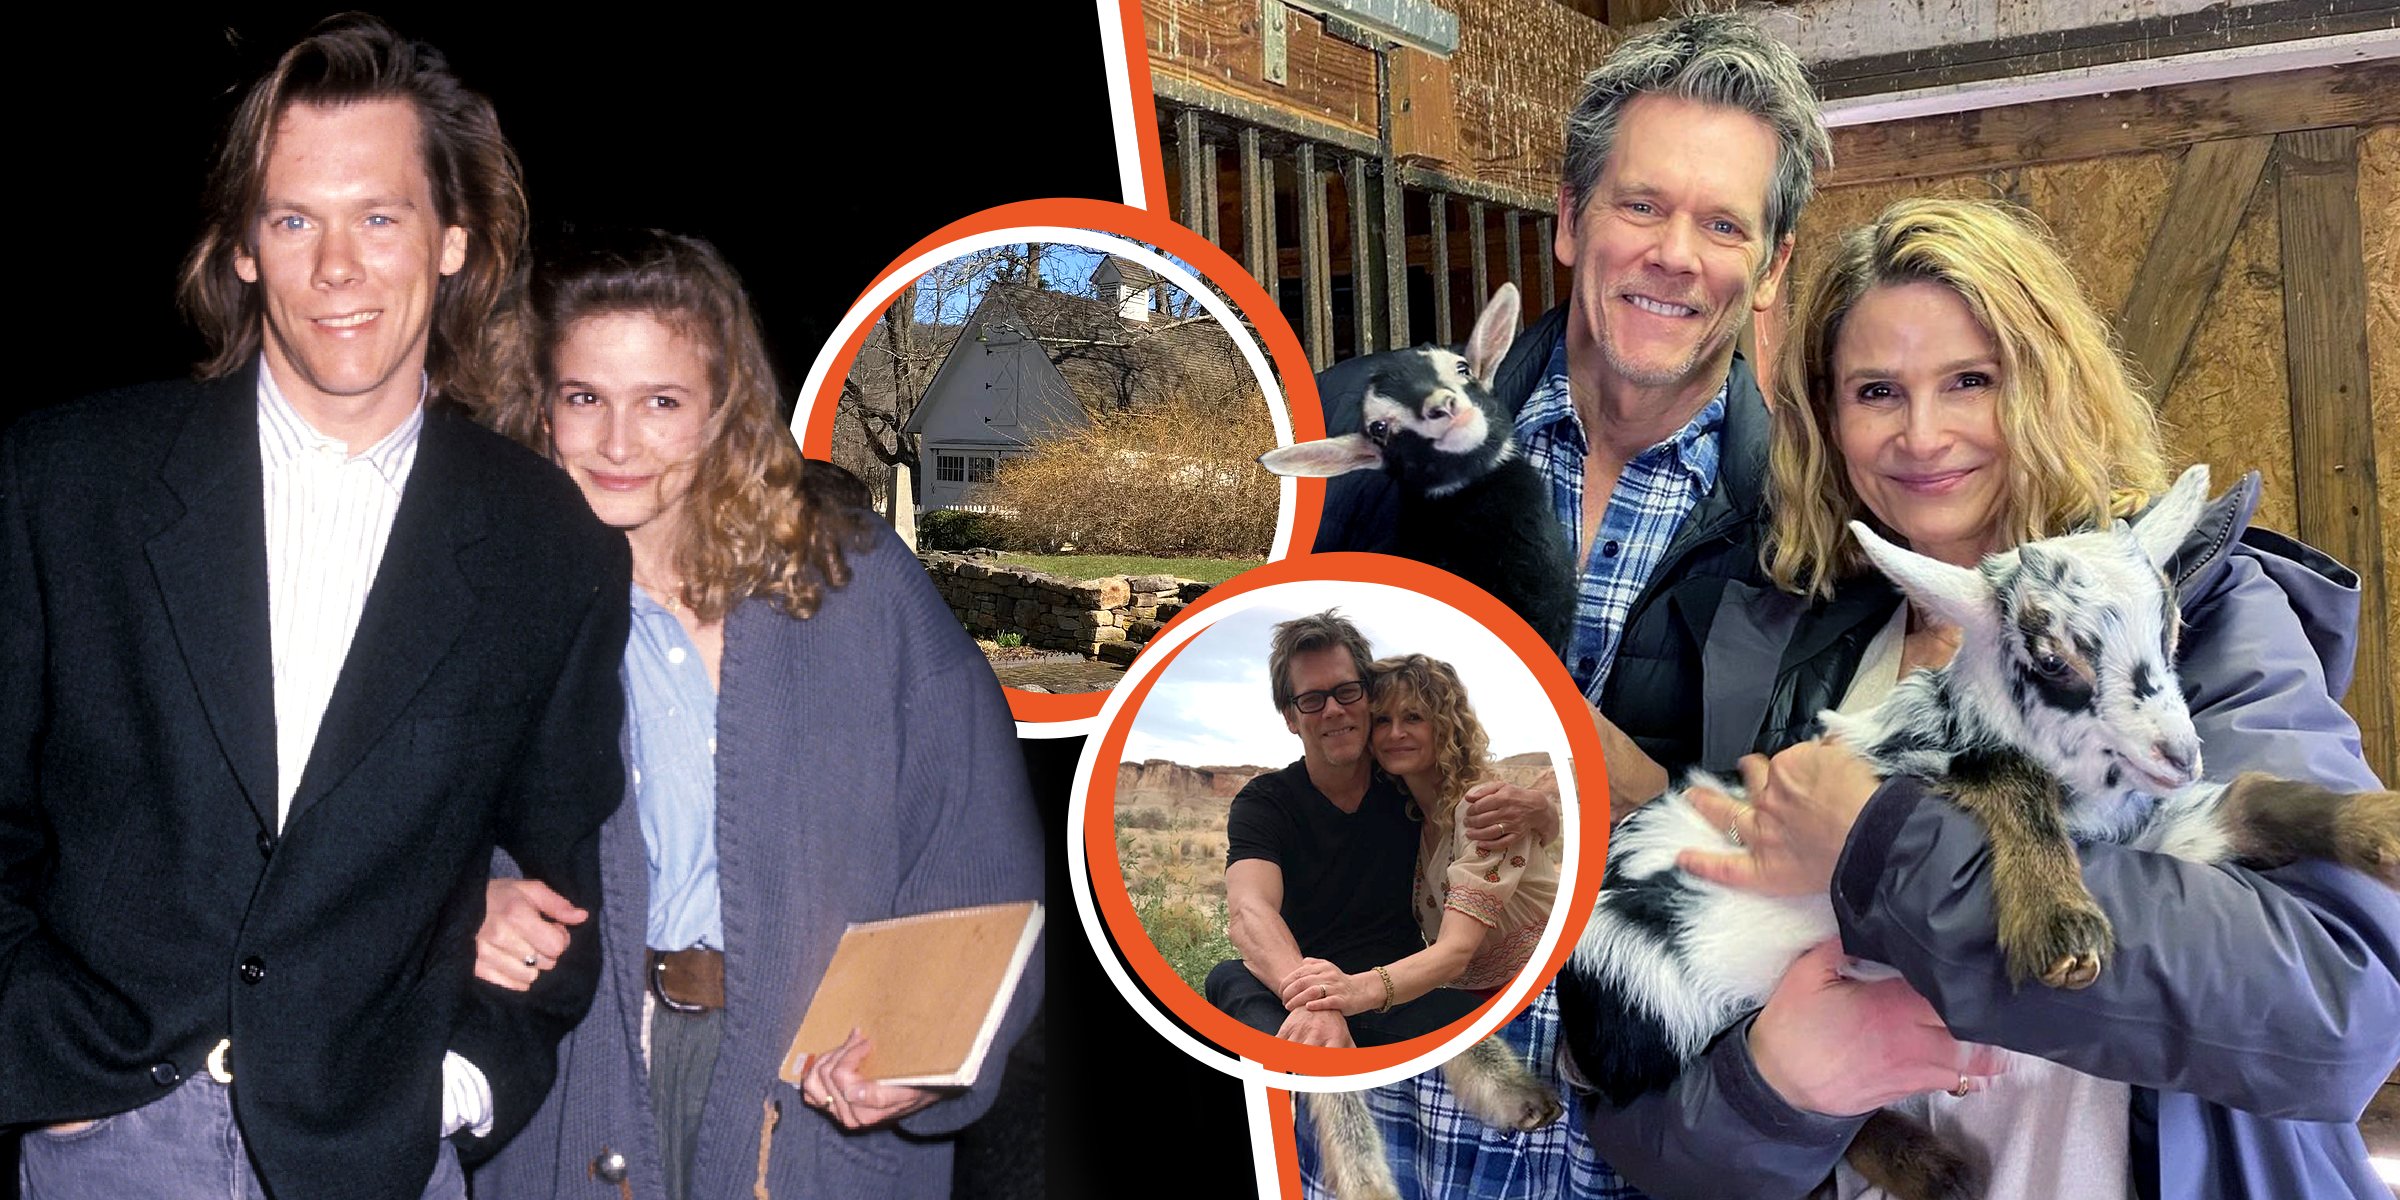 Kevin Bacon and Kyra Sedgwick | An image of their house | Kevin Bacon and Kyra Sedgwick with their goats | Source: Instagram.com/kyrasedgwickofficial | Getty Images | Instagram.com/kevinbacon